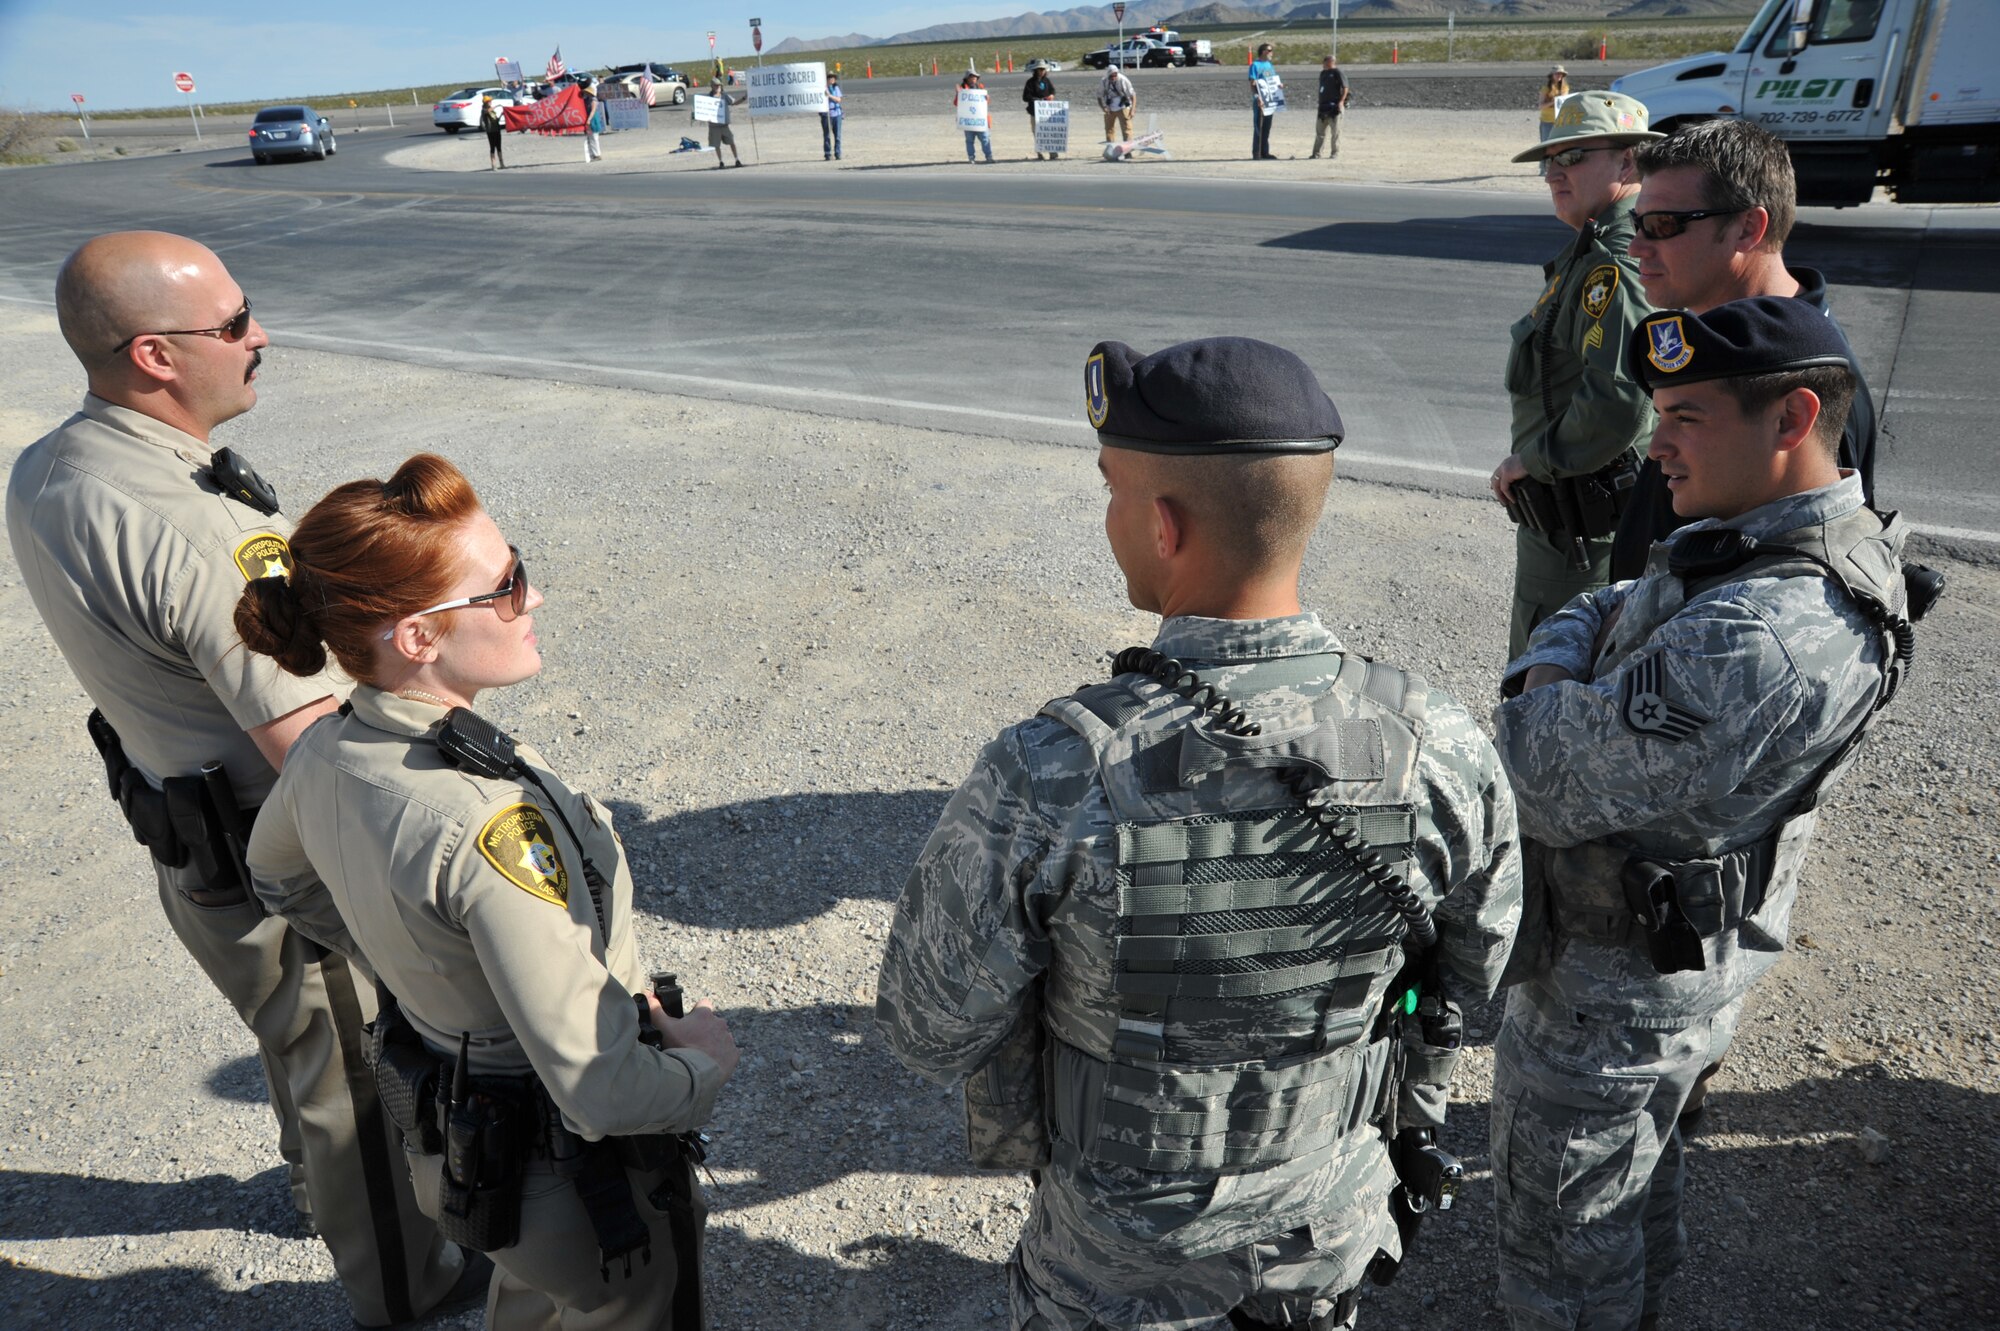 INDIAN SPRINGS, Nev. – 799th Security Forces Squadron and local law enforcement discuss lessons learned during a protest, March 29, 2013. Military and civilian law enforcement agencies partner together to help ensure the safety of Airmen while also protecting the First Amendment rights of U.S. citizens. (U.S. Air Force photo by Senior Master Sgt. P.H./Released)